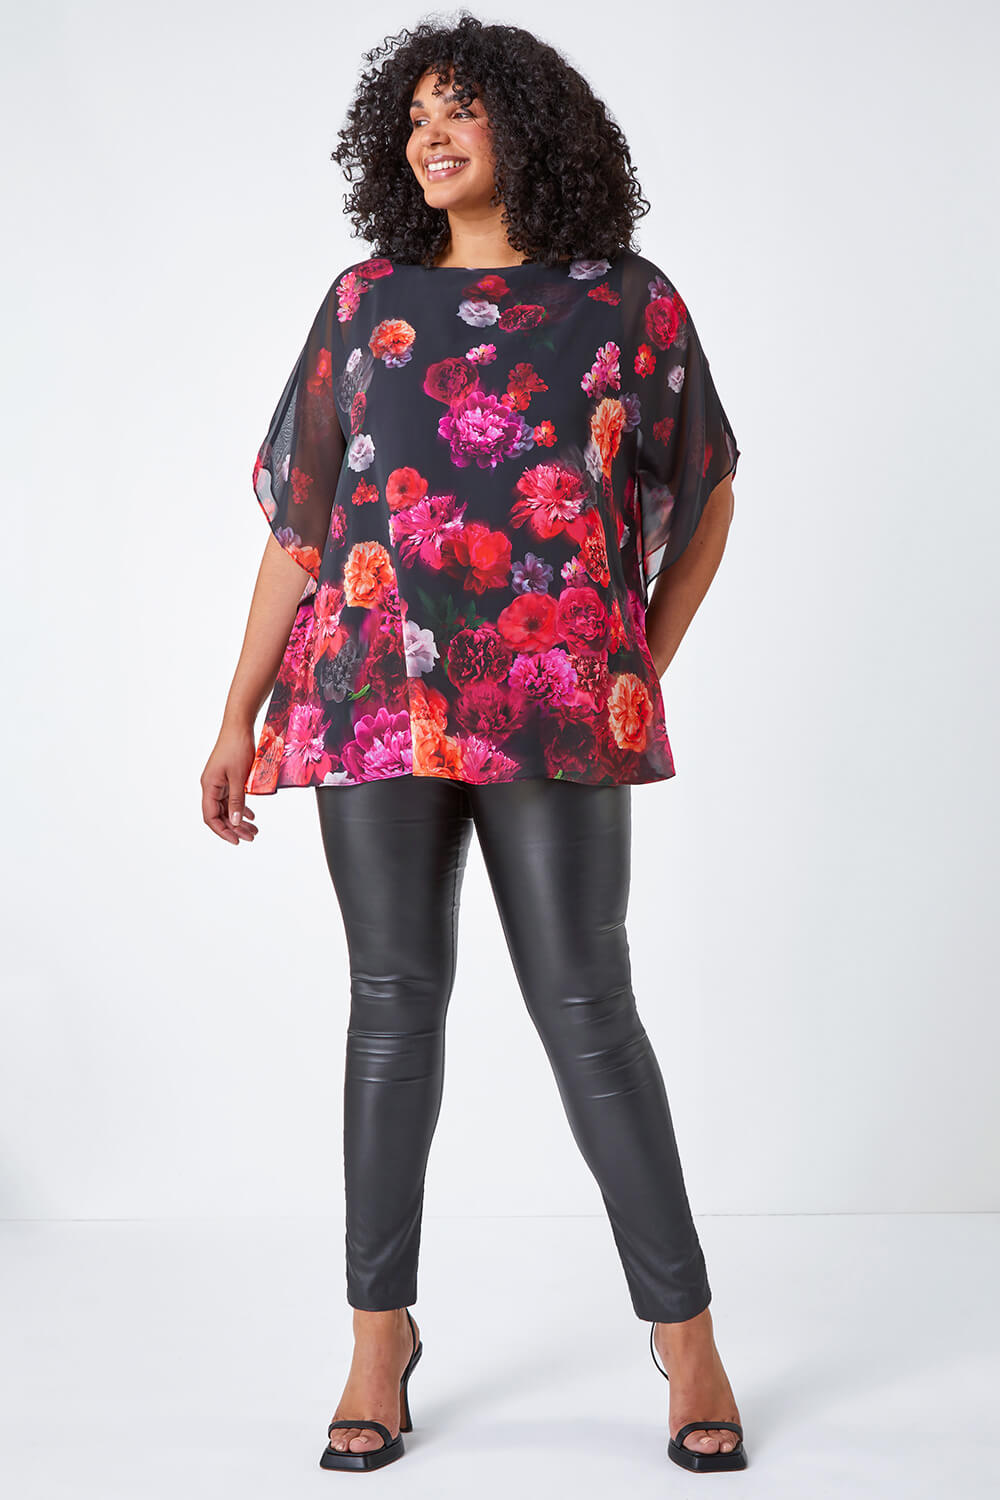 PINK Curve Floral Print Chiffon Overlay Top, Image 2 of 5